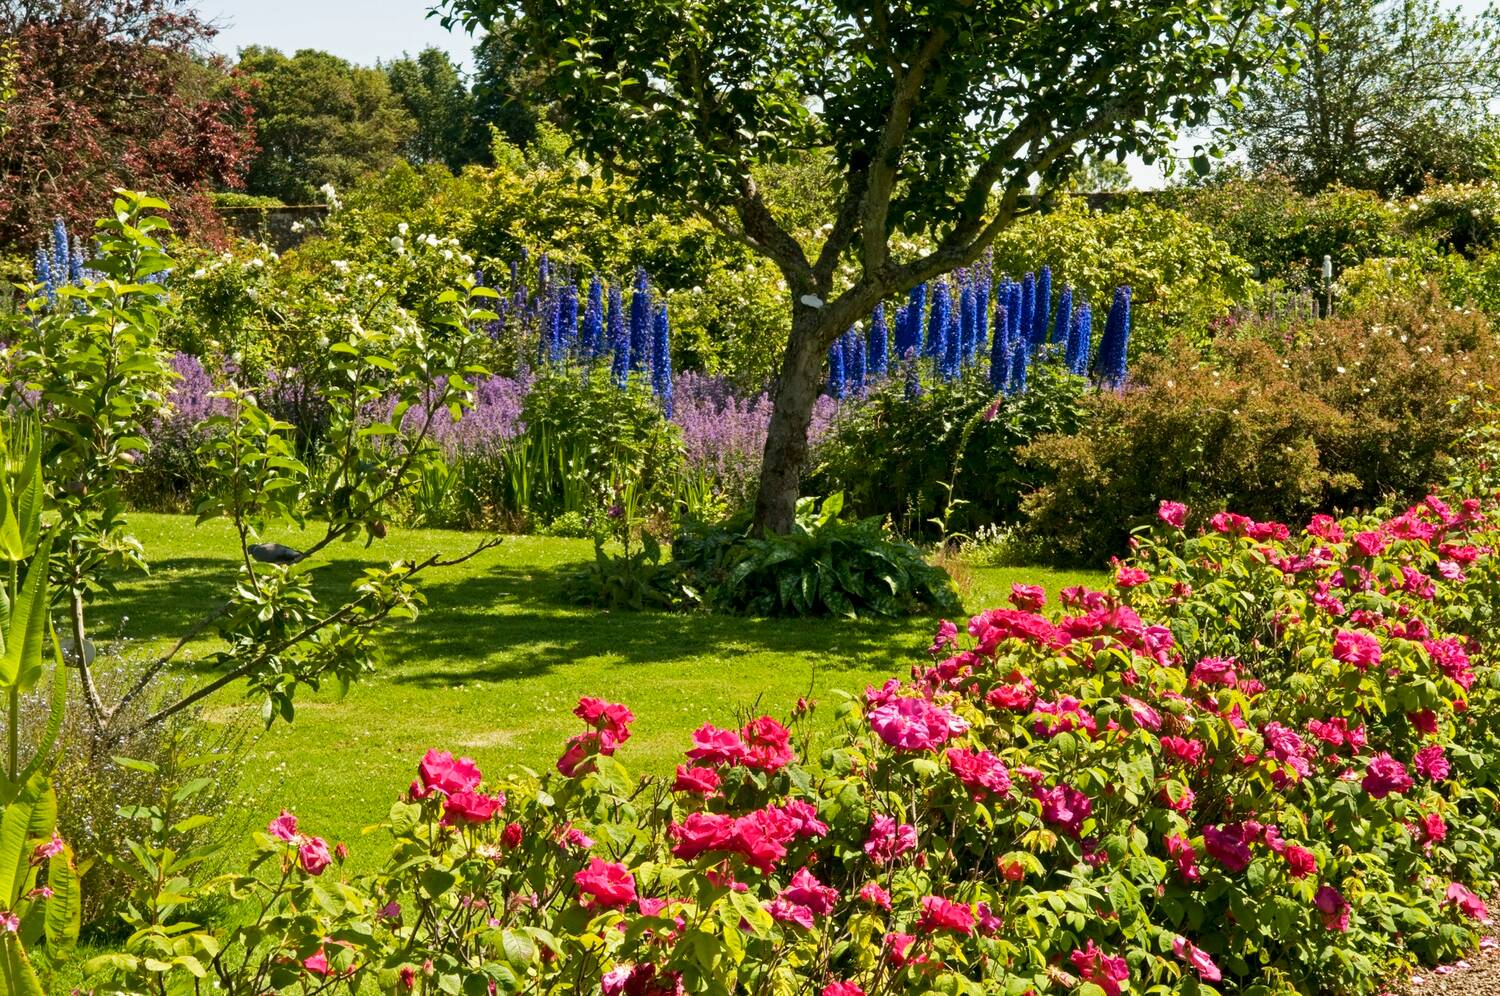 A view of a garden awash with colour in summer. A row of pink-flowering shrubs stands in the foreground, with tall blue delphiniums growing from the flowerbeds in the background, across the lawn.